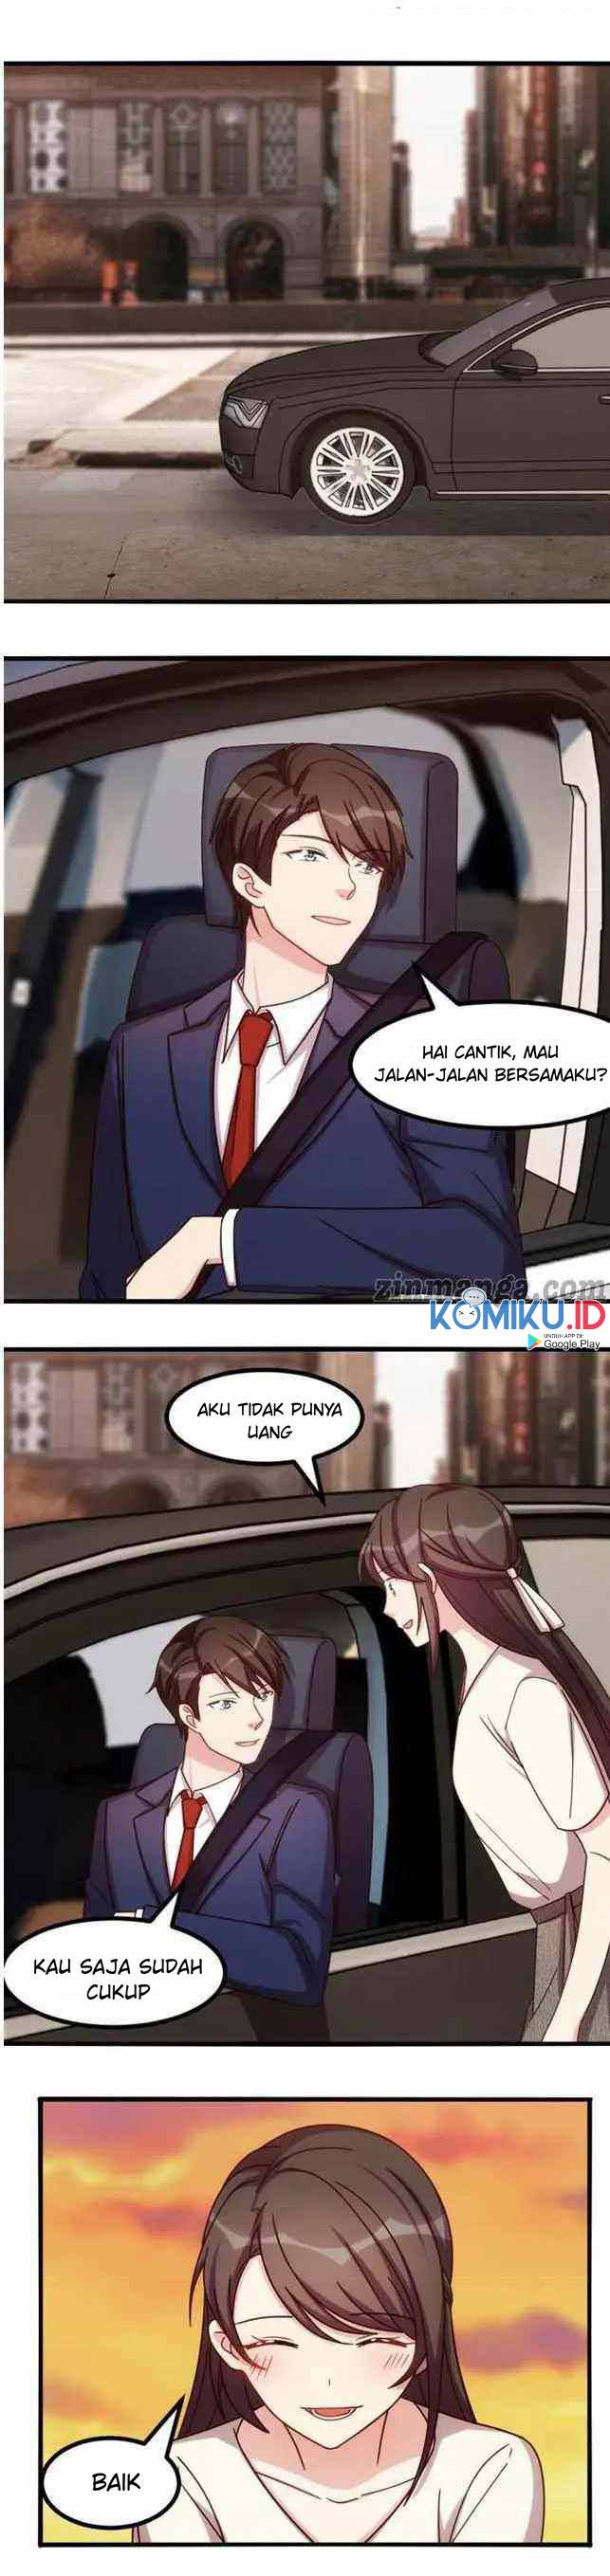 CEO’s Sudden Proposal Chapter 223 9